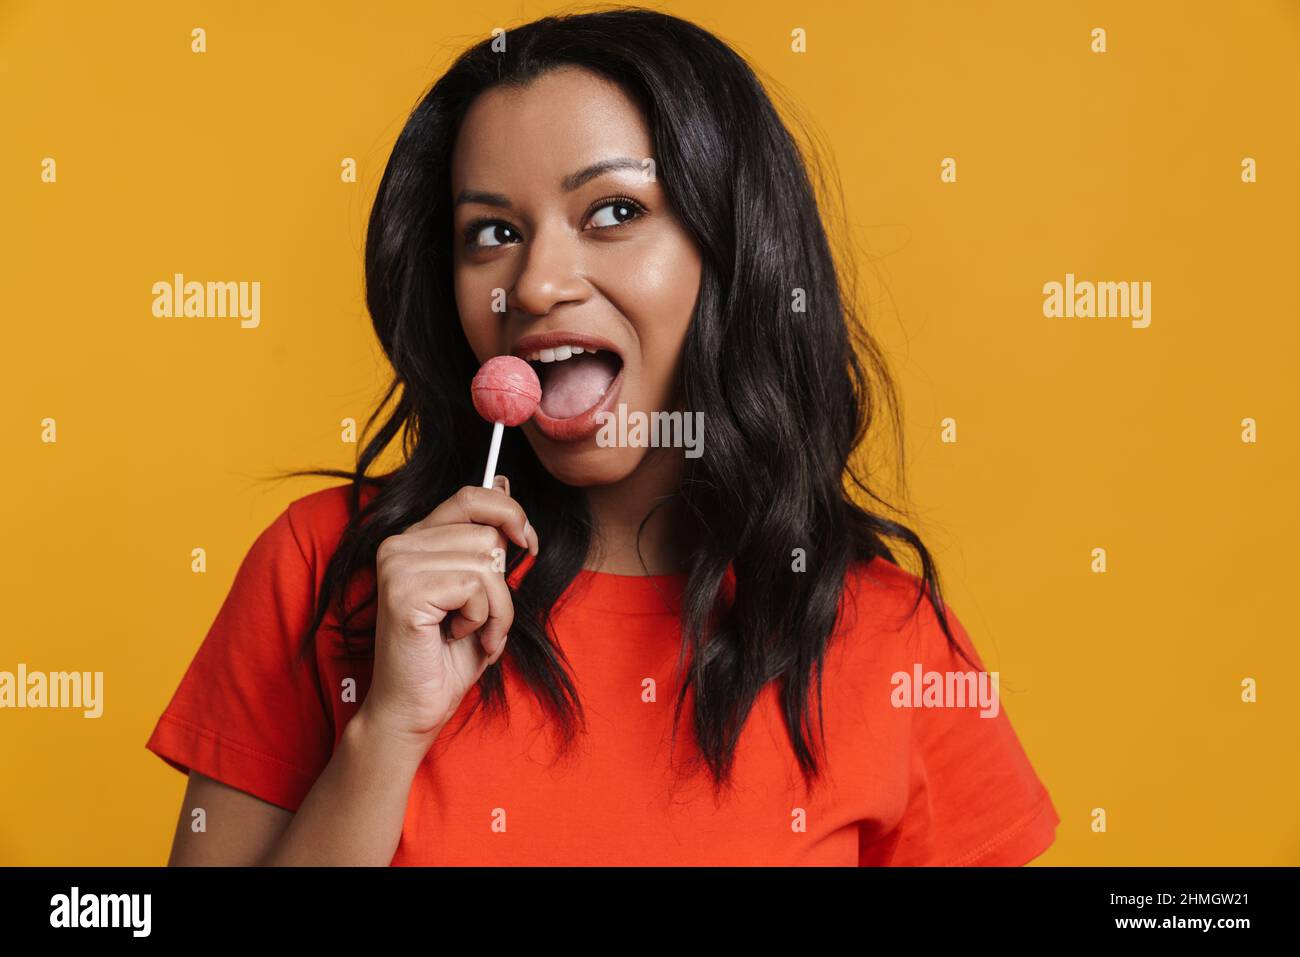 Young black woman smiling while licking lollipop isolated over yellow background Stock Photo